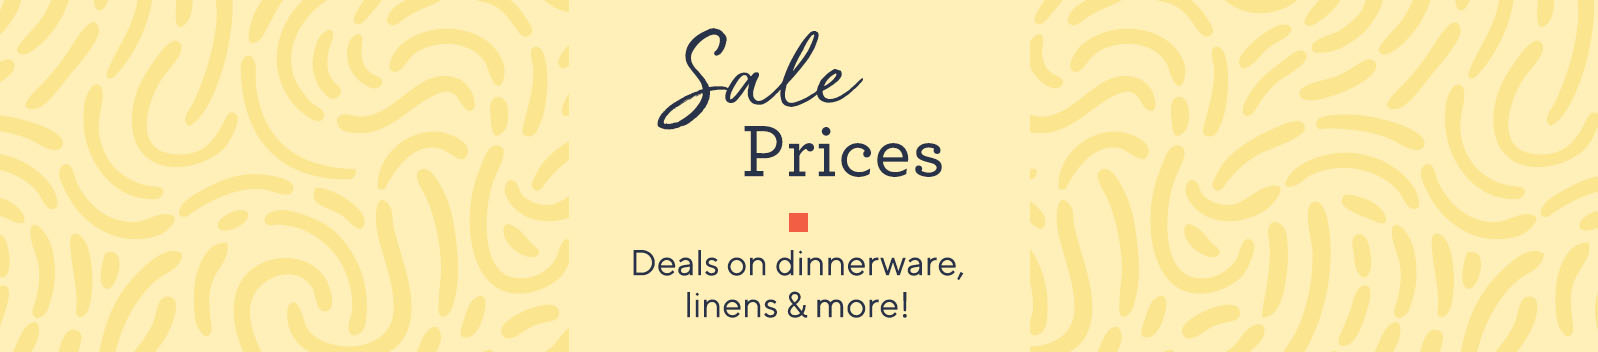 Sale Prices Deals on dinnerware, linens & more!